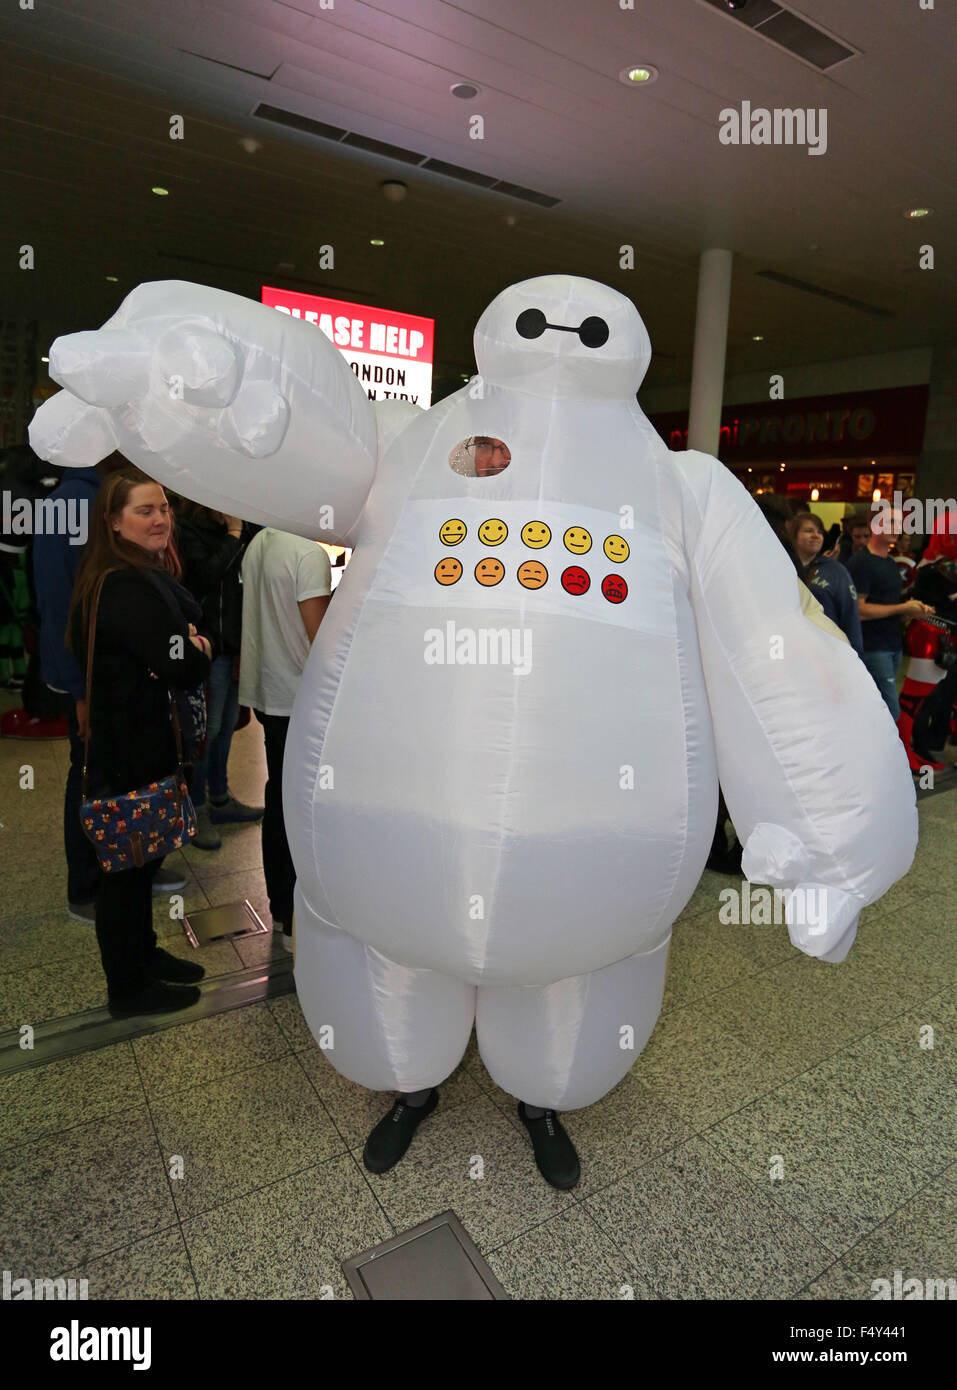 London, UK. 24th October 2015. Participant dressed as Baymax from Big Hero 6  at MCM London Comic Con at Excel London Credit: Paul Brown/Alamy Live News  Stock Photo - Alamy